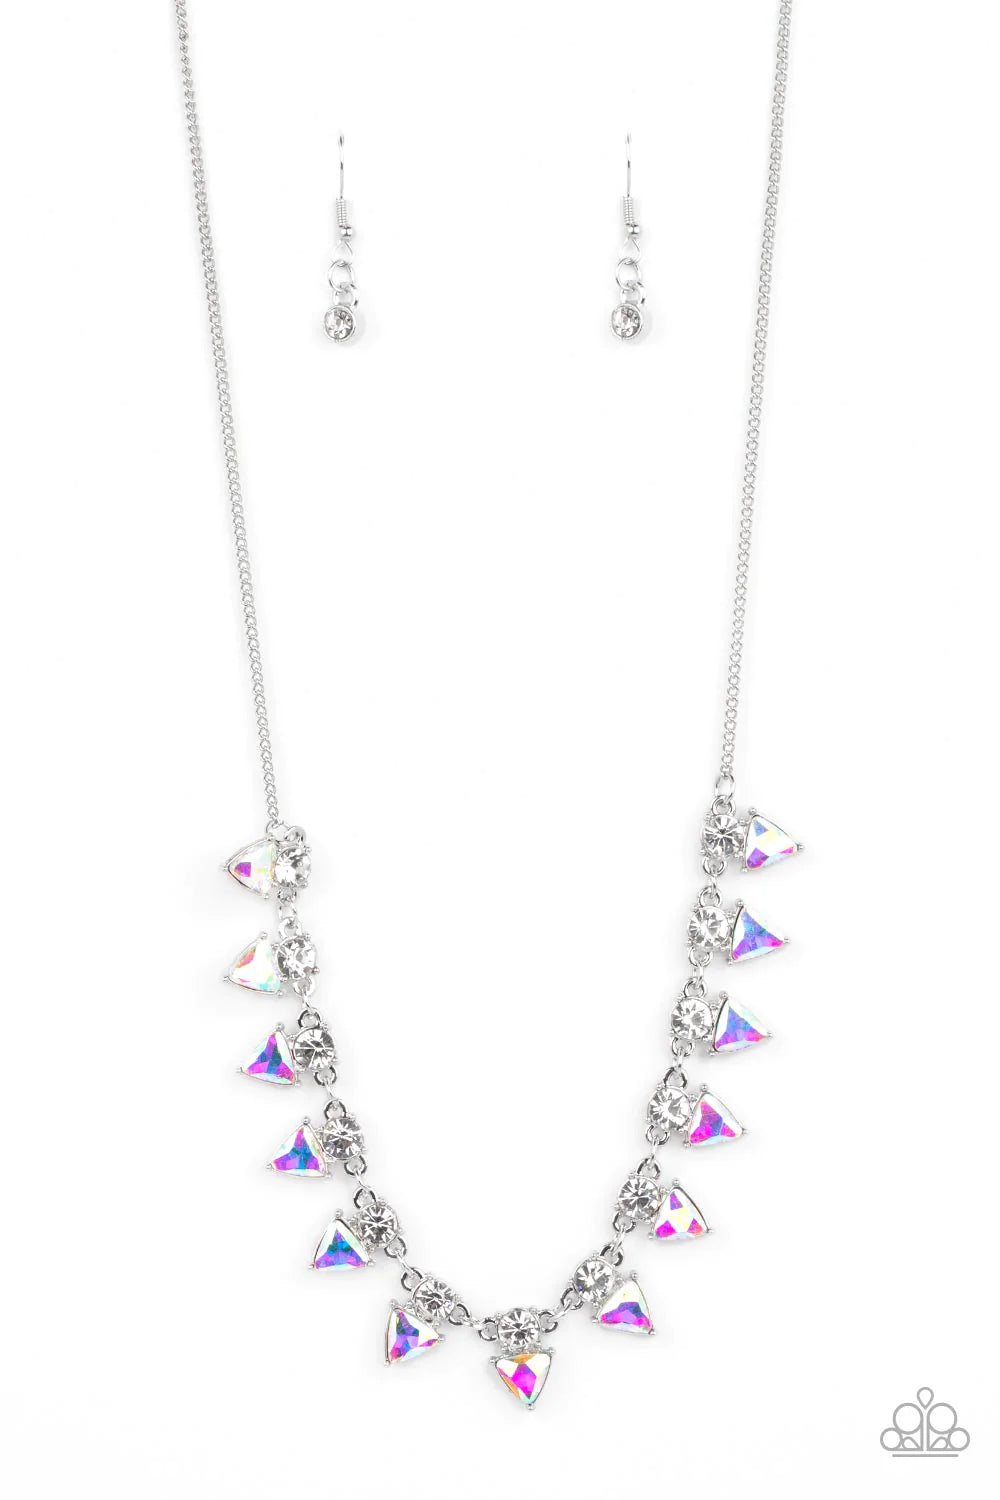 Paparazzi Accessories Razor-Sharp Refinement - Blue Solitaire white rhinestones sparkle atop iridescent prism-like gems below the collar, linking into a sharp-looking statement piece. Features an adjustable clasp closure. Due to its prismatic palette, col